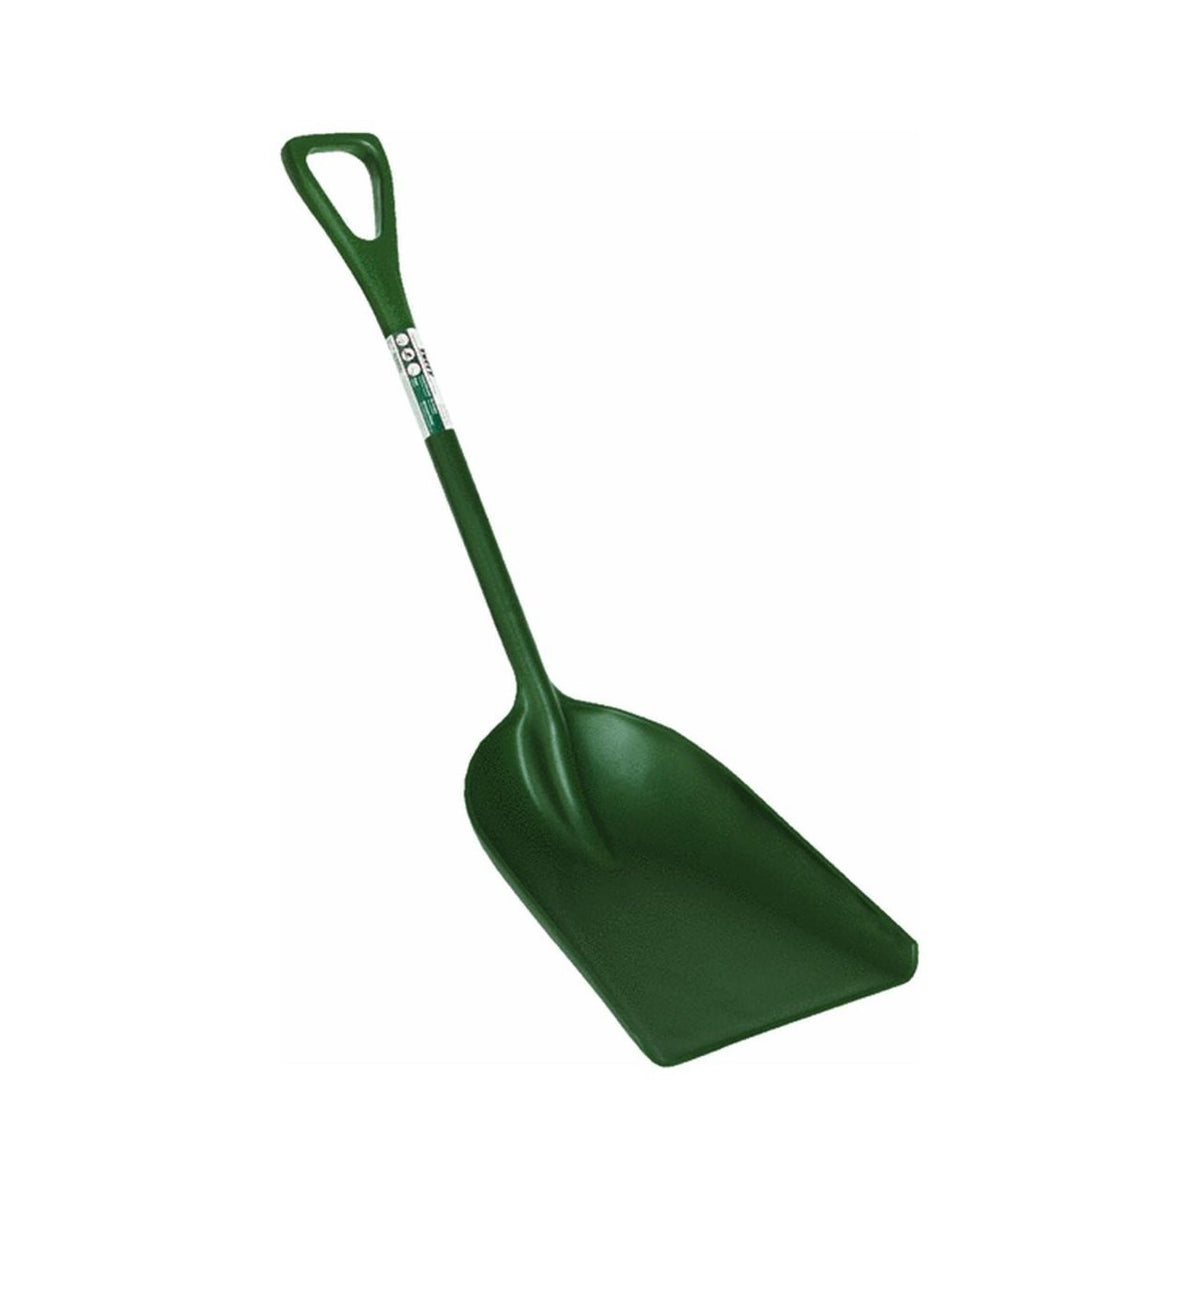 buy scoops & gardening tools at cheap rate in bulk. wholesale & retail lawn & garden goods & supplies store.